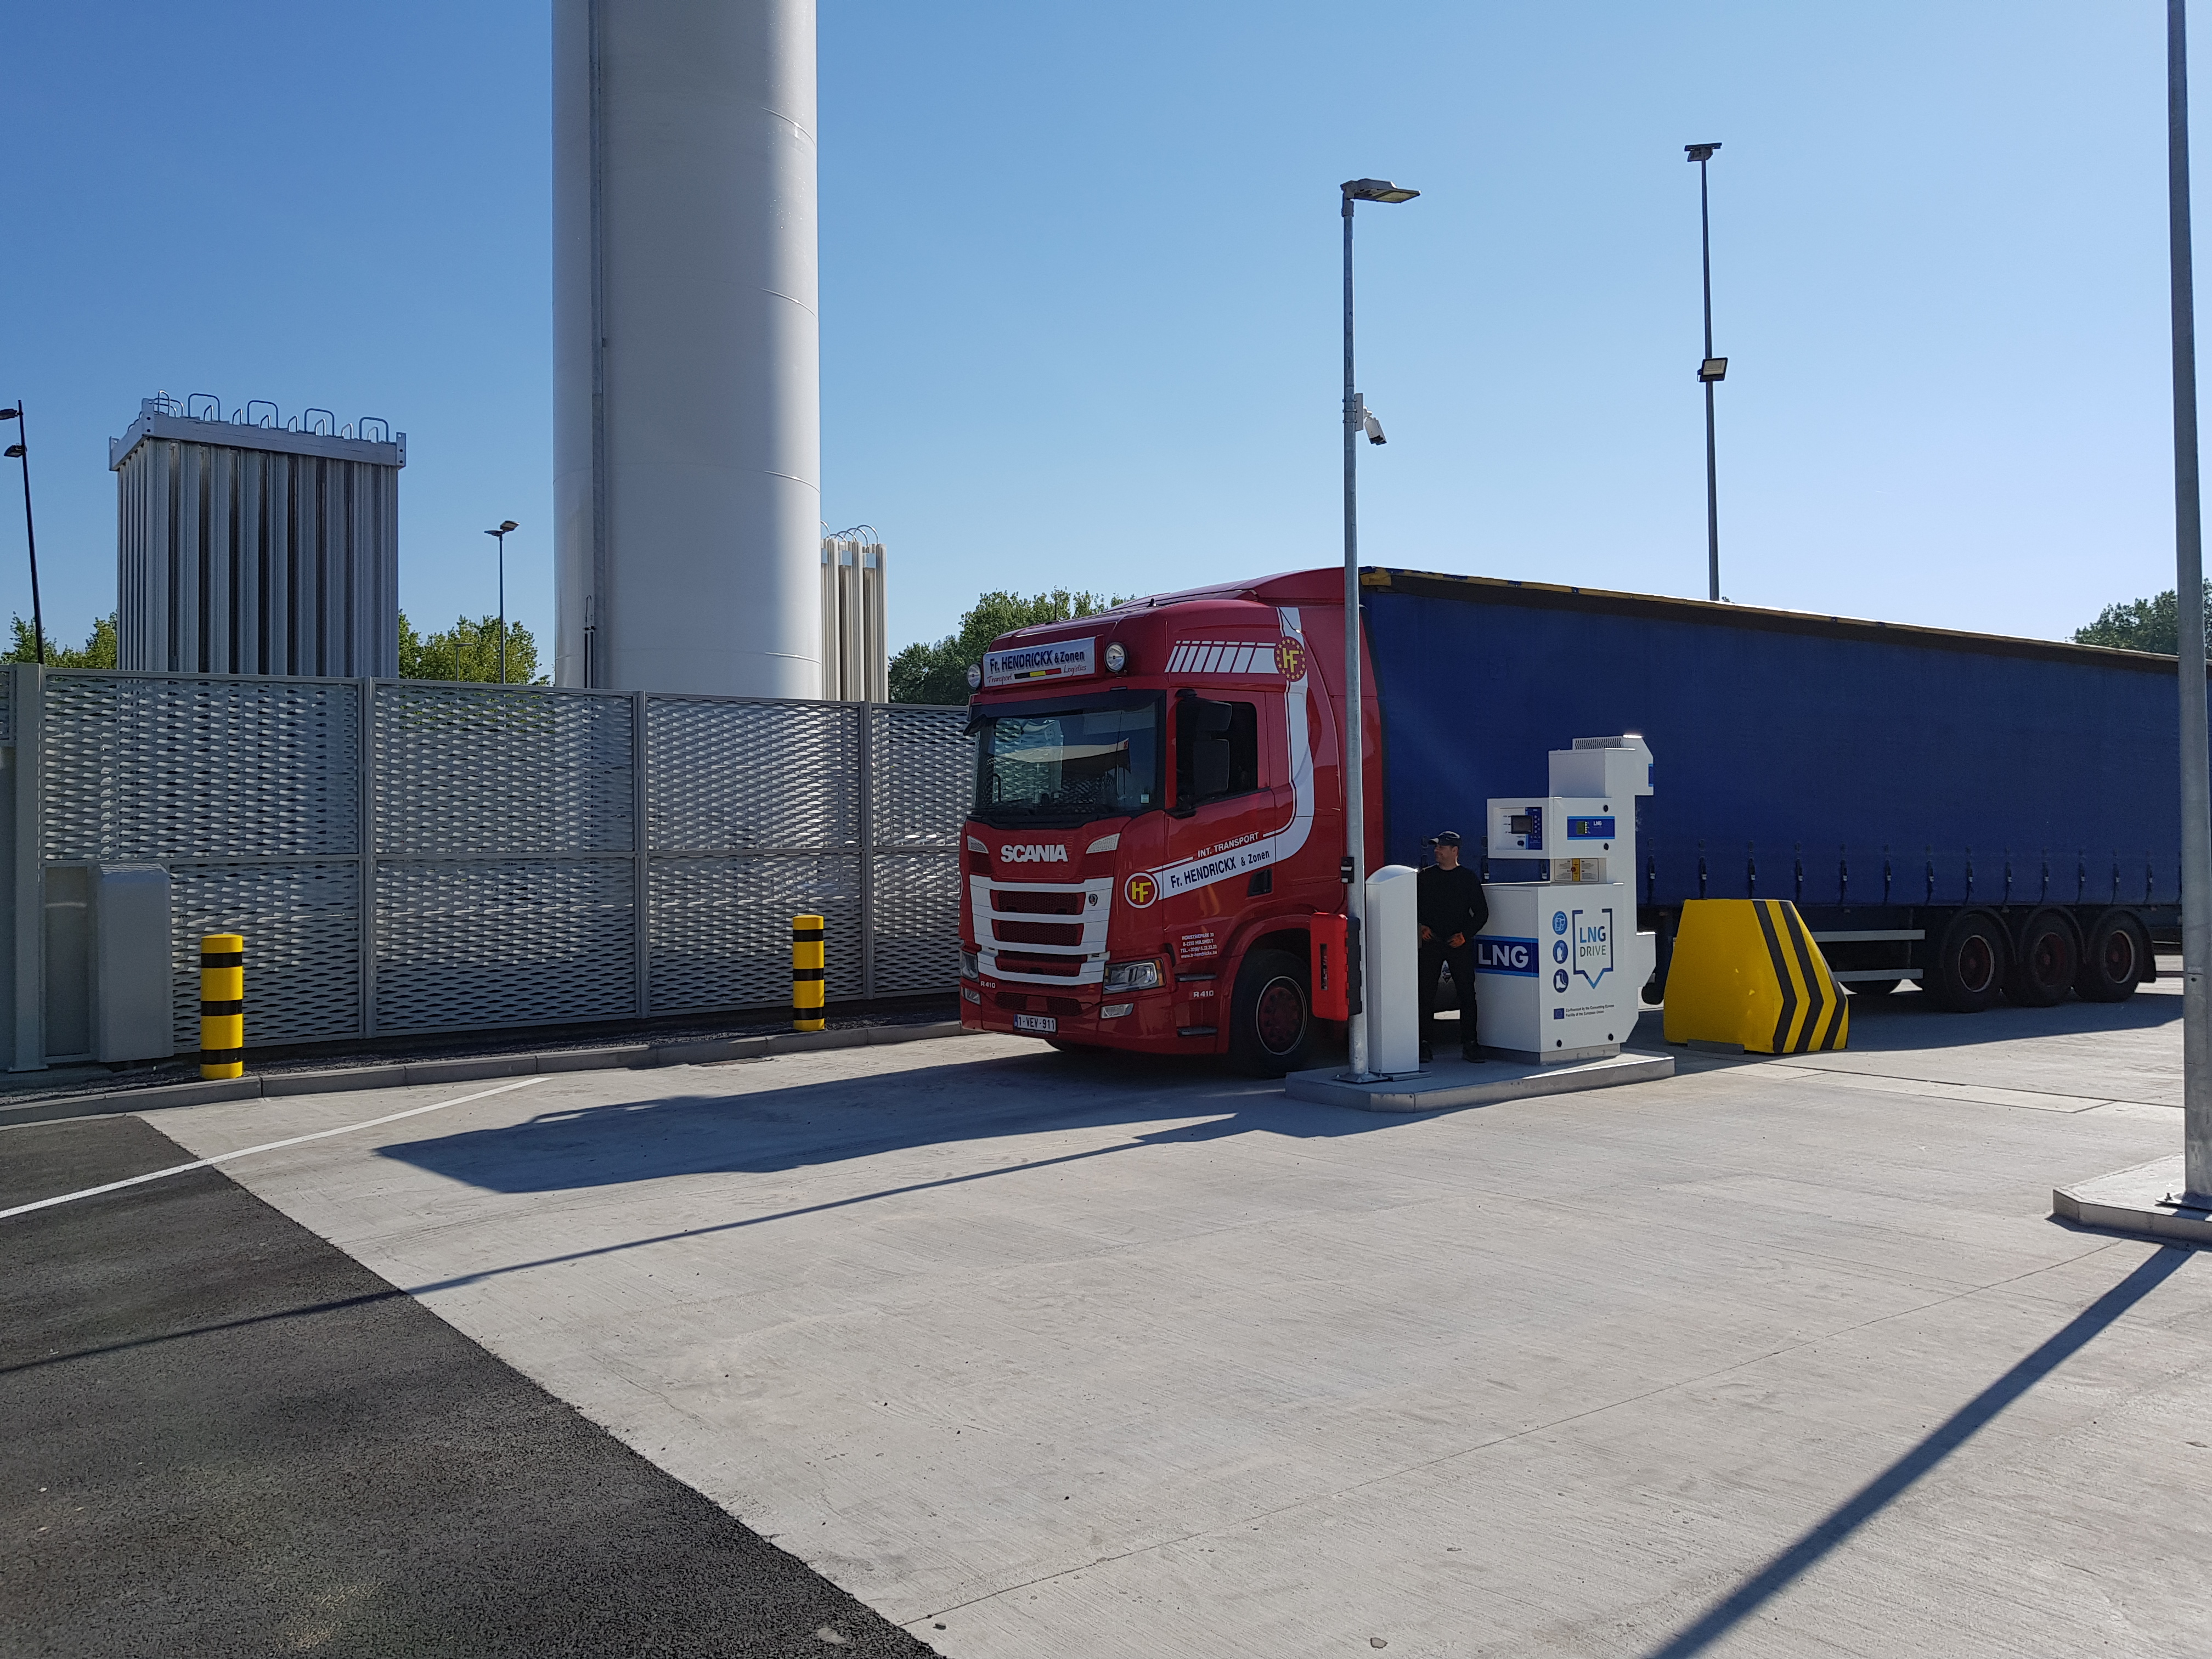 LIQAL, Drive Systems partner up on new LNG station in Belgium